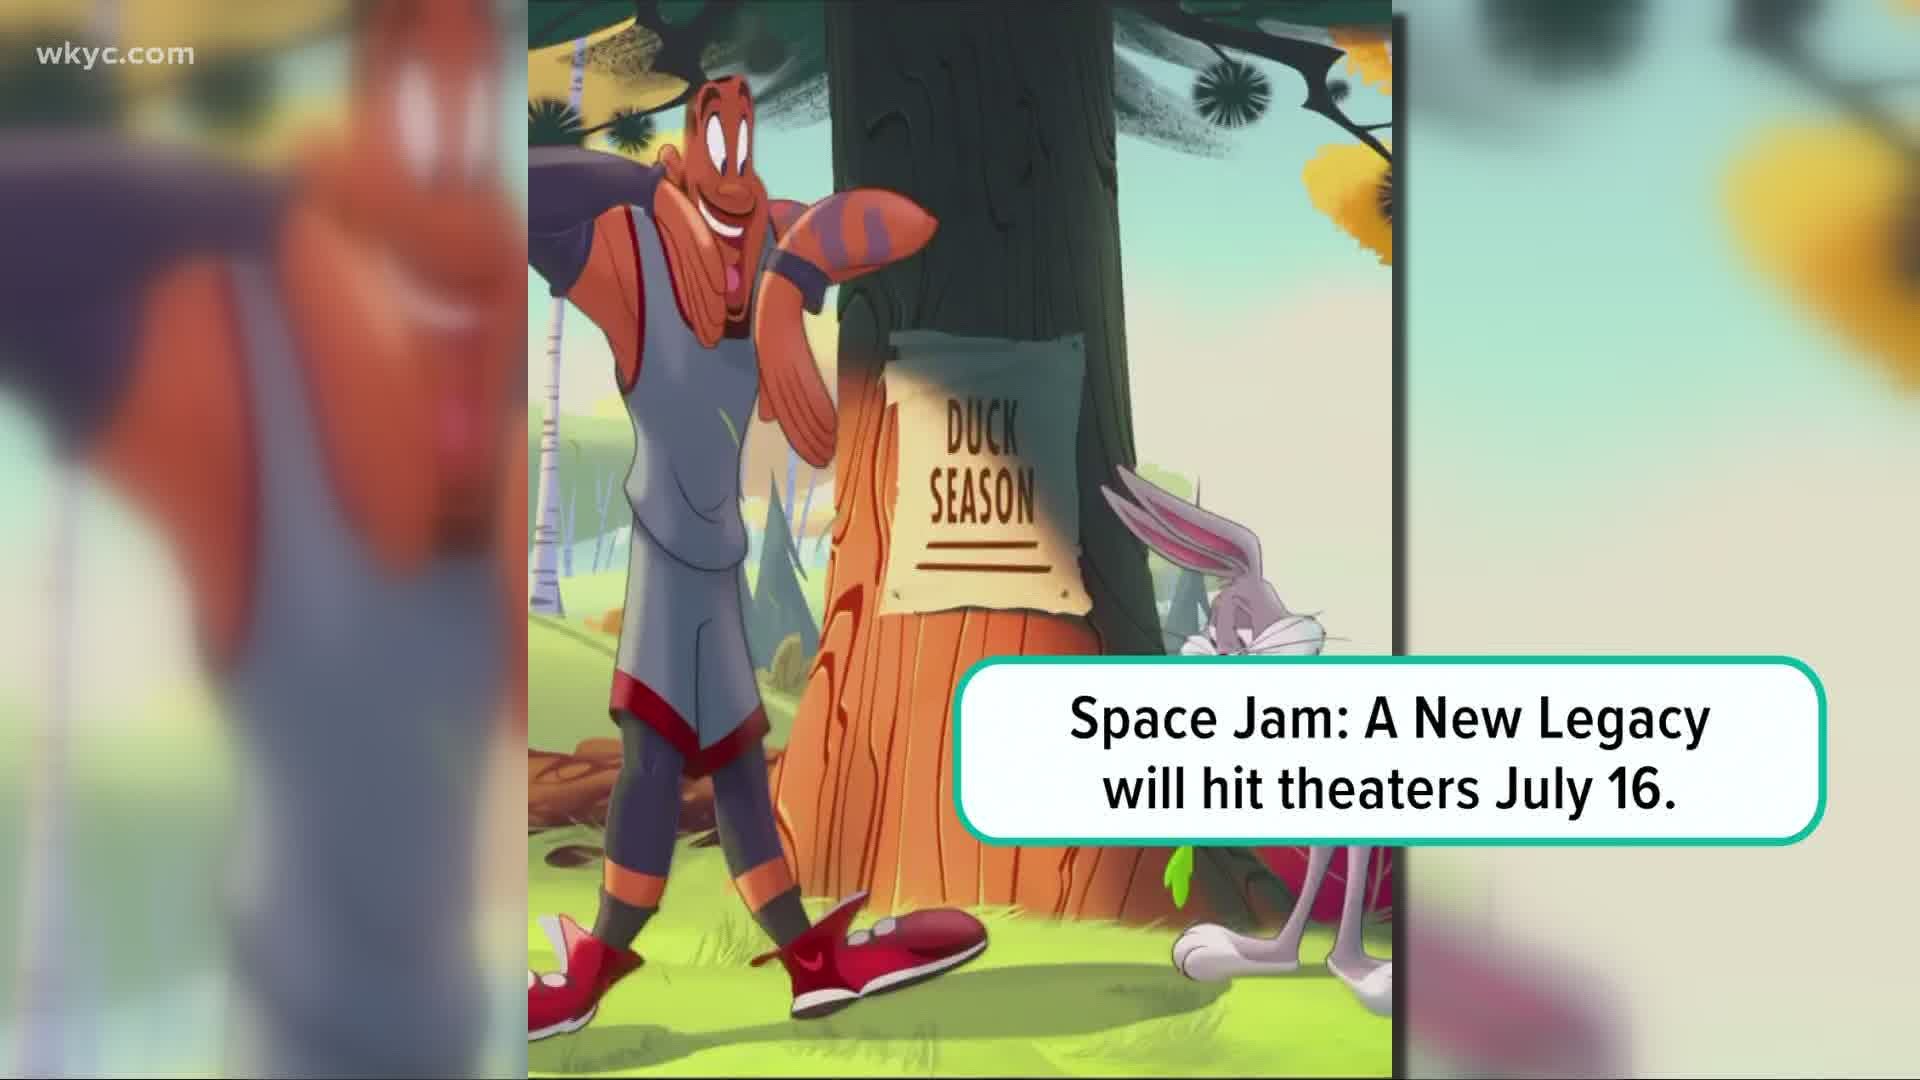 A new trailer for LeBron James' "Space Jam: A New Legacy" was released on Wednesday. Last week, LeBron James' Lakers were eliminated in the first round.